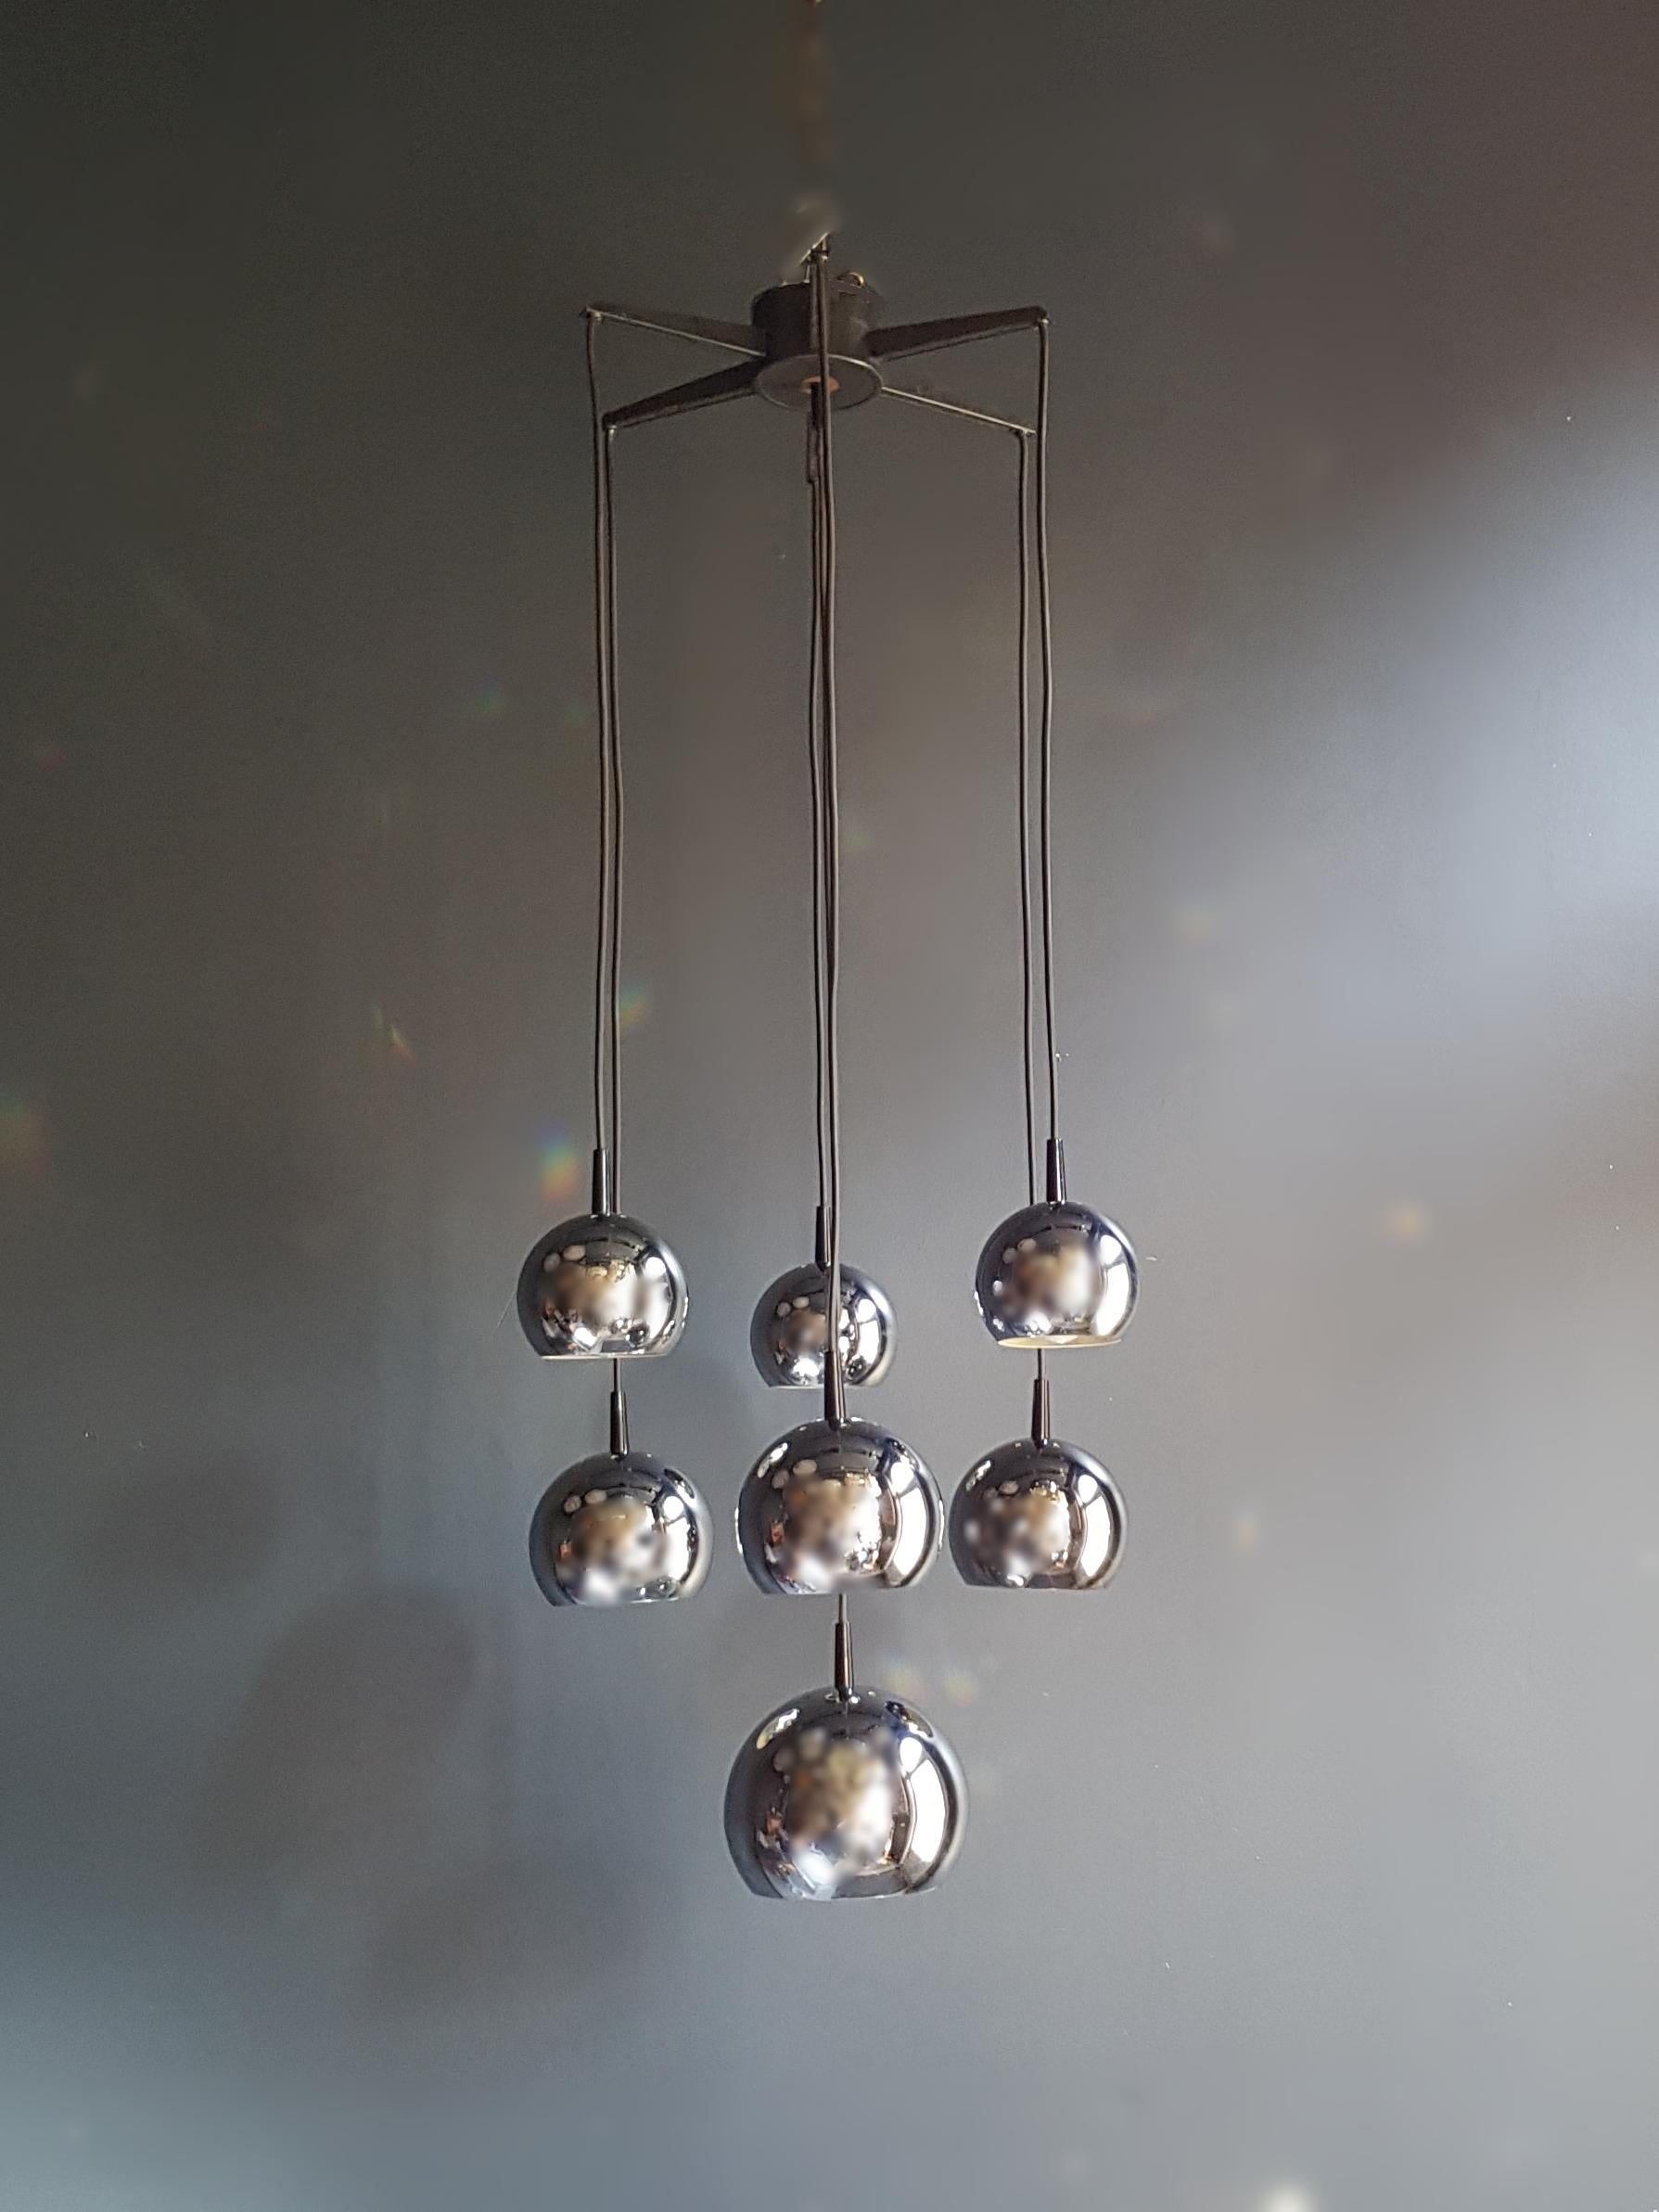 A piece of history: vintage pendant chandelier from the 1970s in space age design

Immerse yourself in a time when design and innovation went hand in hand. Our 1970s vintage pendant chandelier is a true gem of Space Age design, a stunning